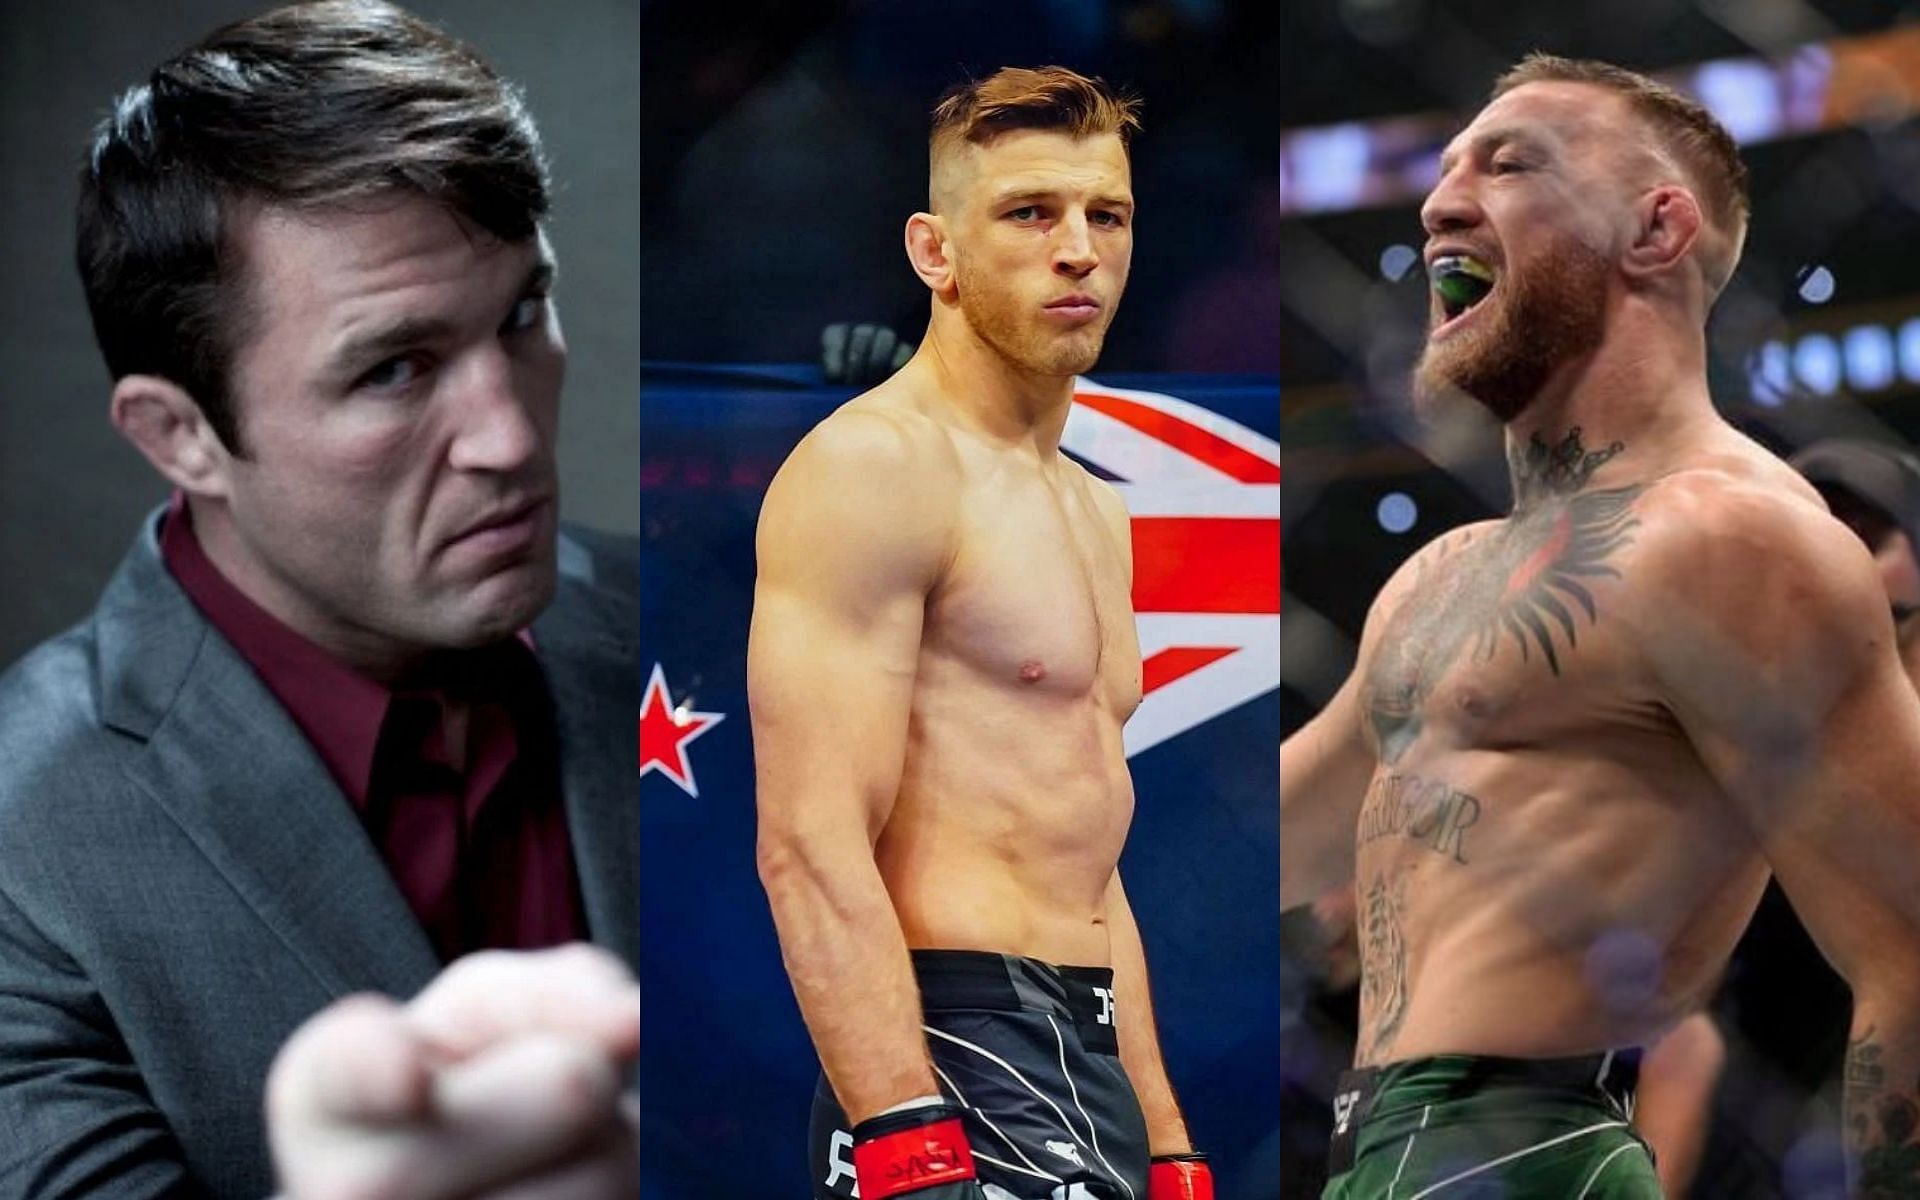 (Left to right) Chael Sonnen, Dan Hooker, and Conor McGregor